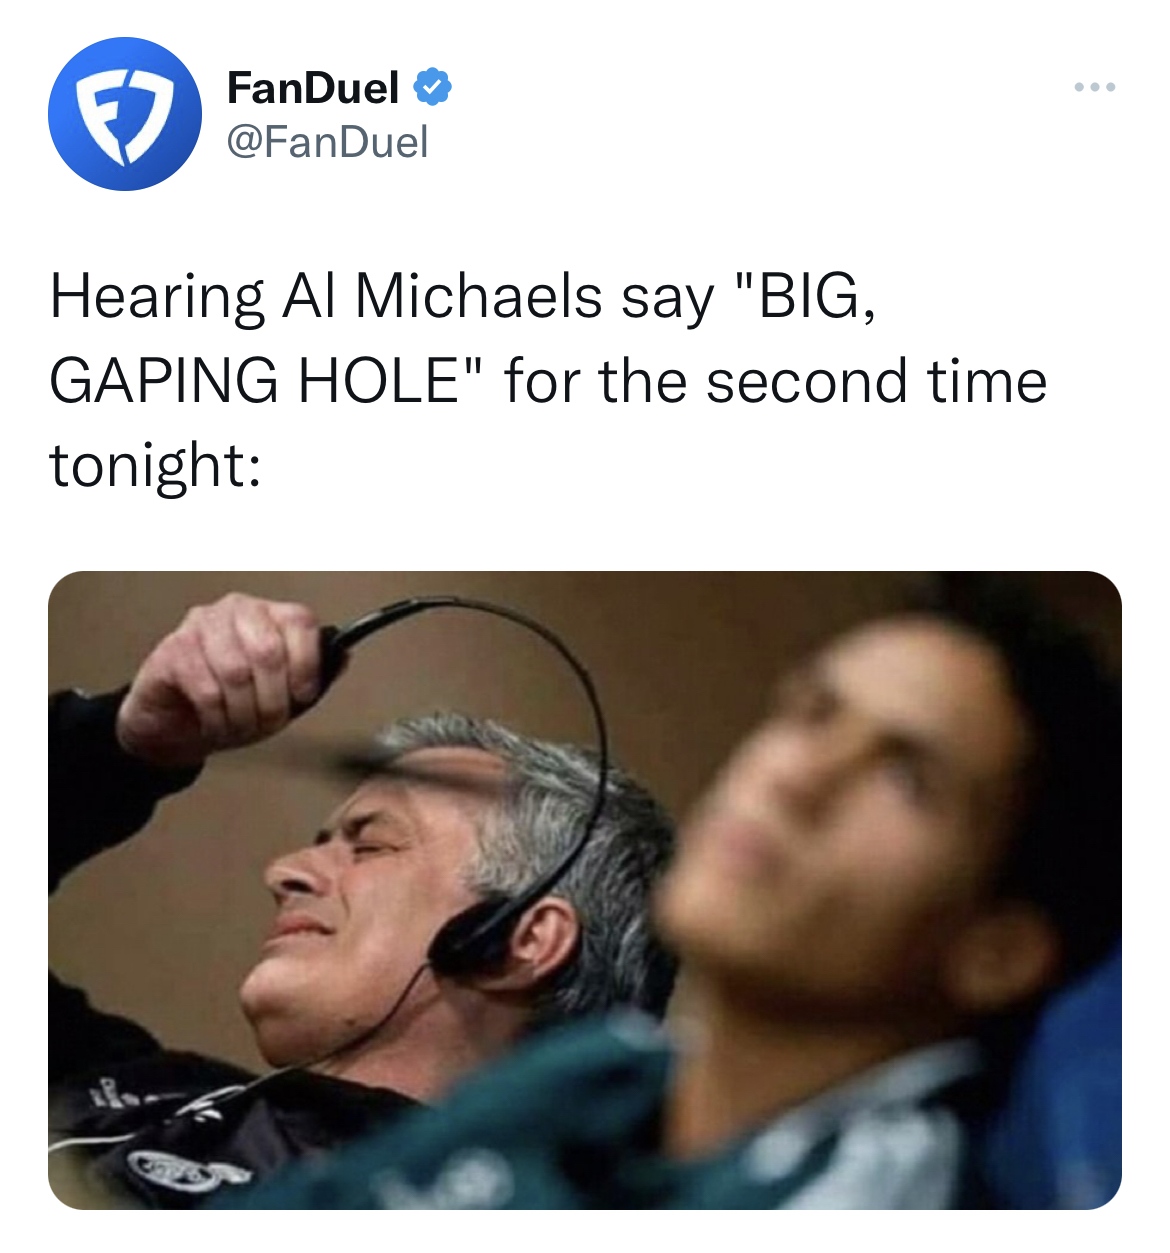 tweets roasting celebs - human behavior - FanDuel Hearing Al Michaels say "Big, Gaping Hole" for the second time tonight